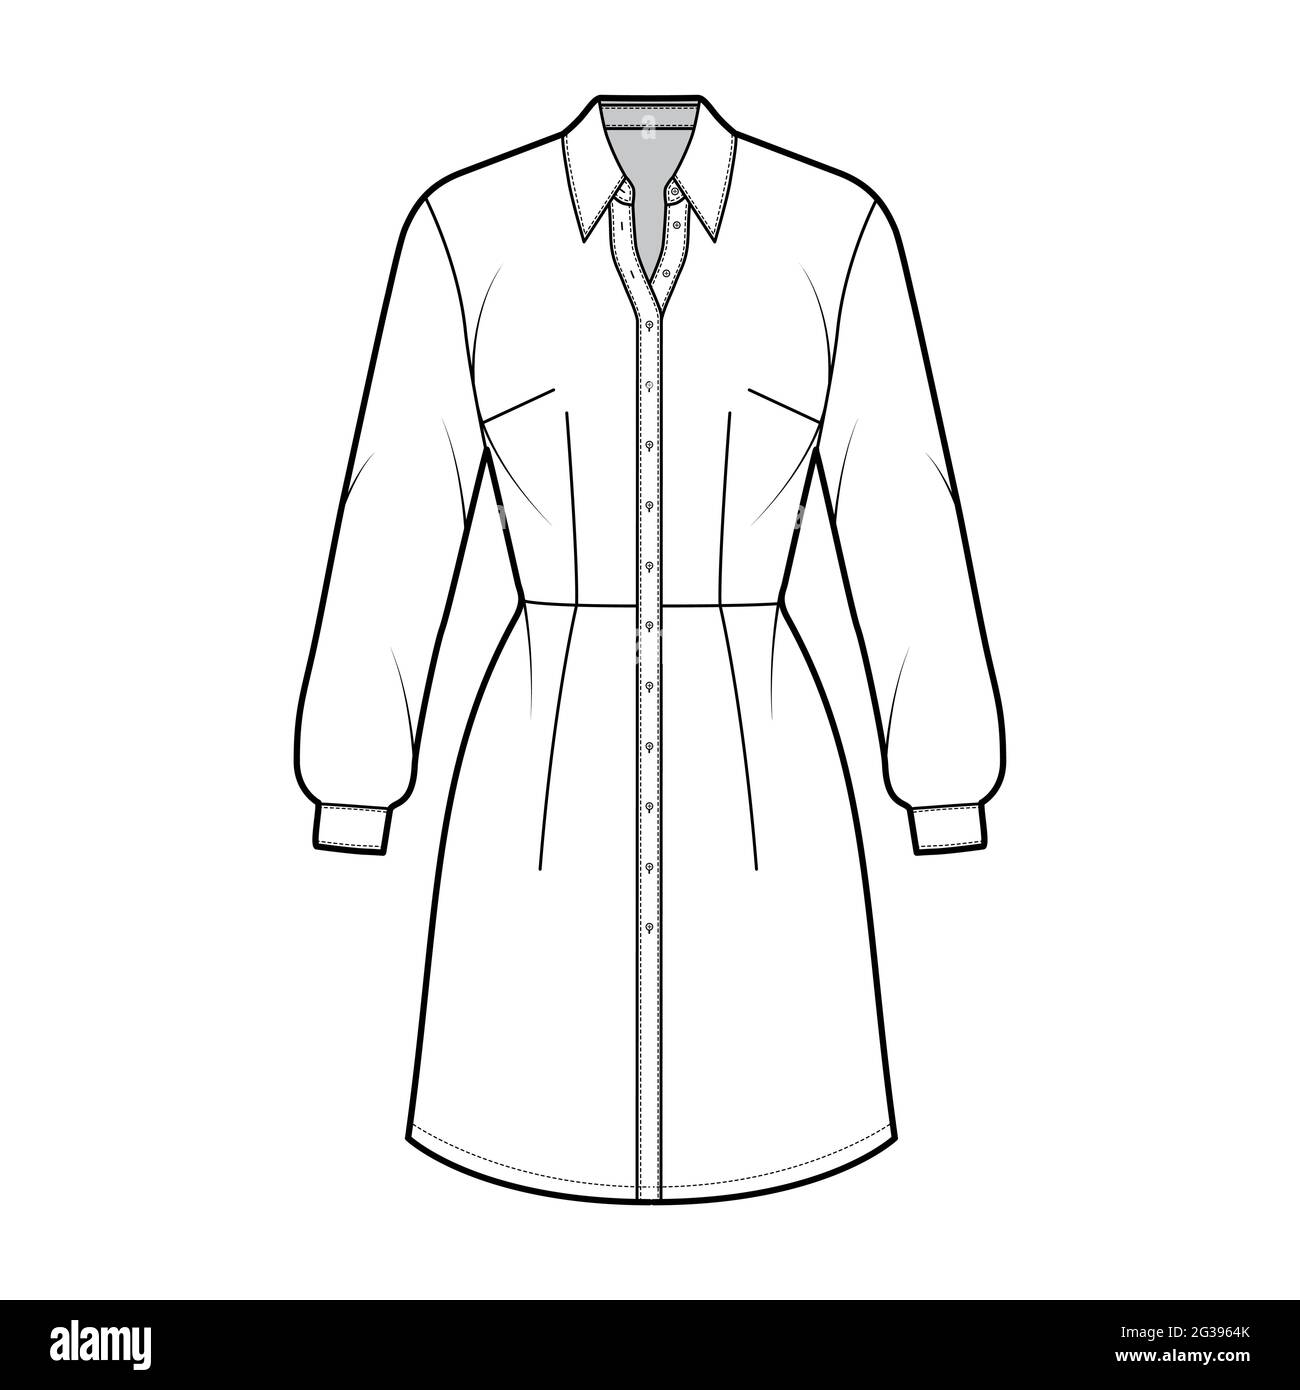 Dress shirt technical fashion illustration with long sleeves, fitted body, knee length pencil skirt, classic collar, button closure. Flat apparel front, white color style. Women, men unisex CAD mockup Stock Vector